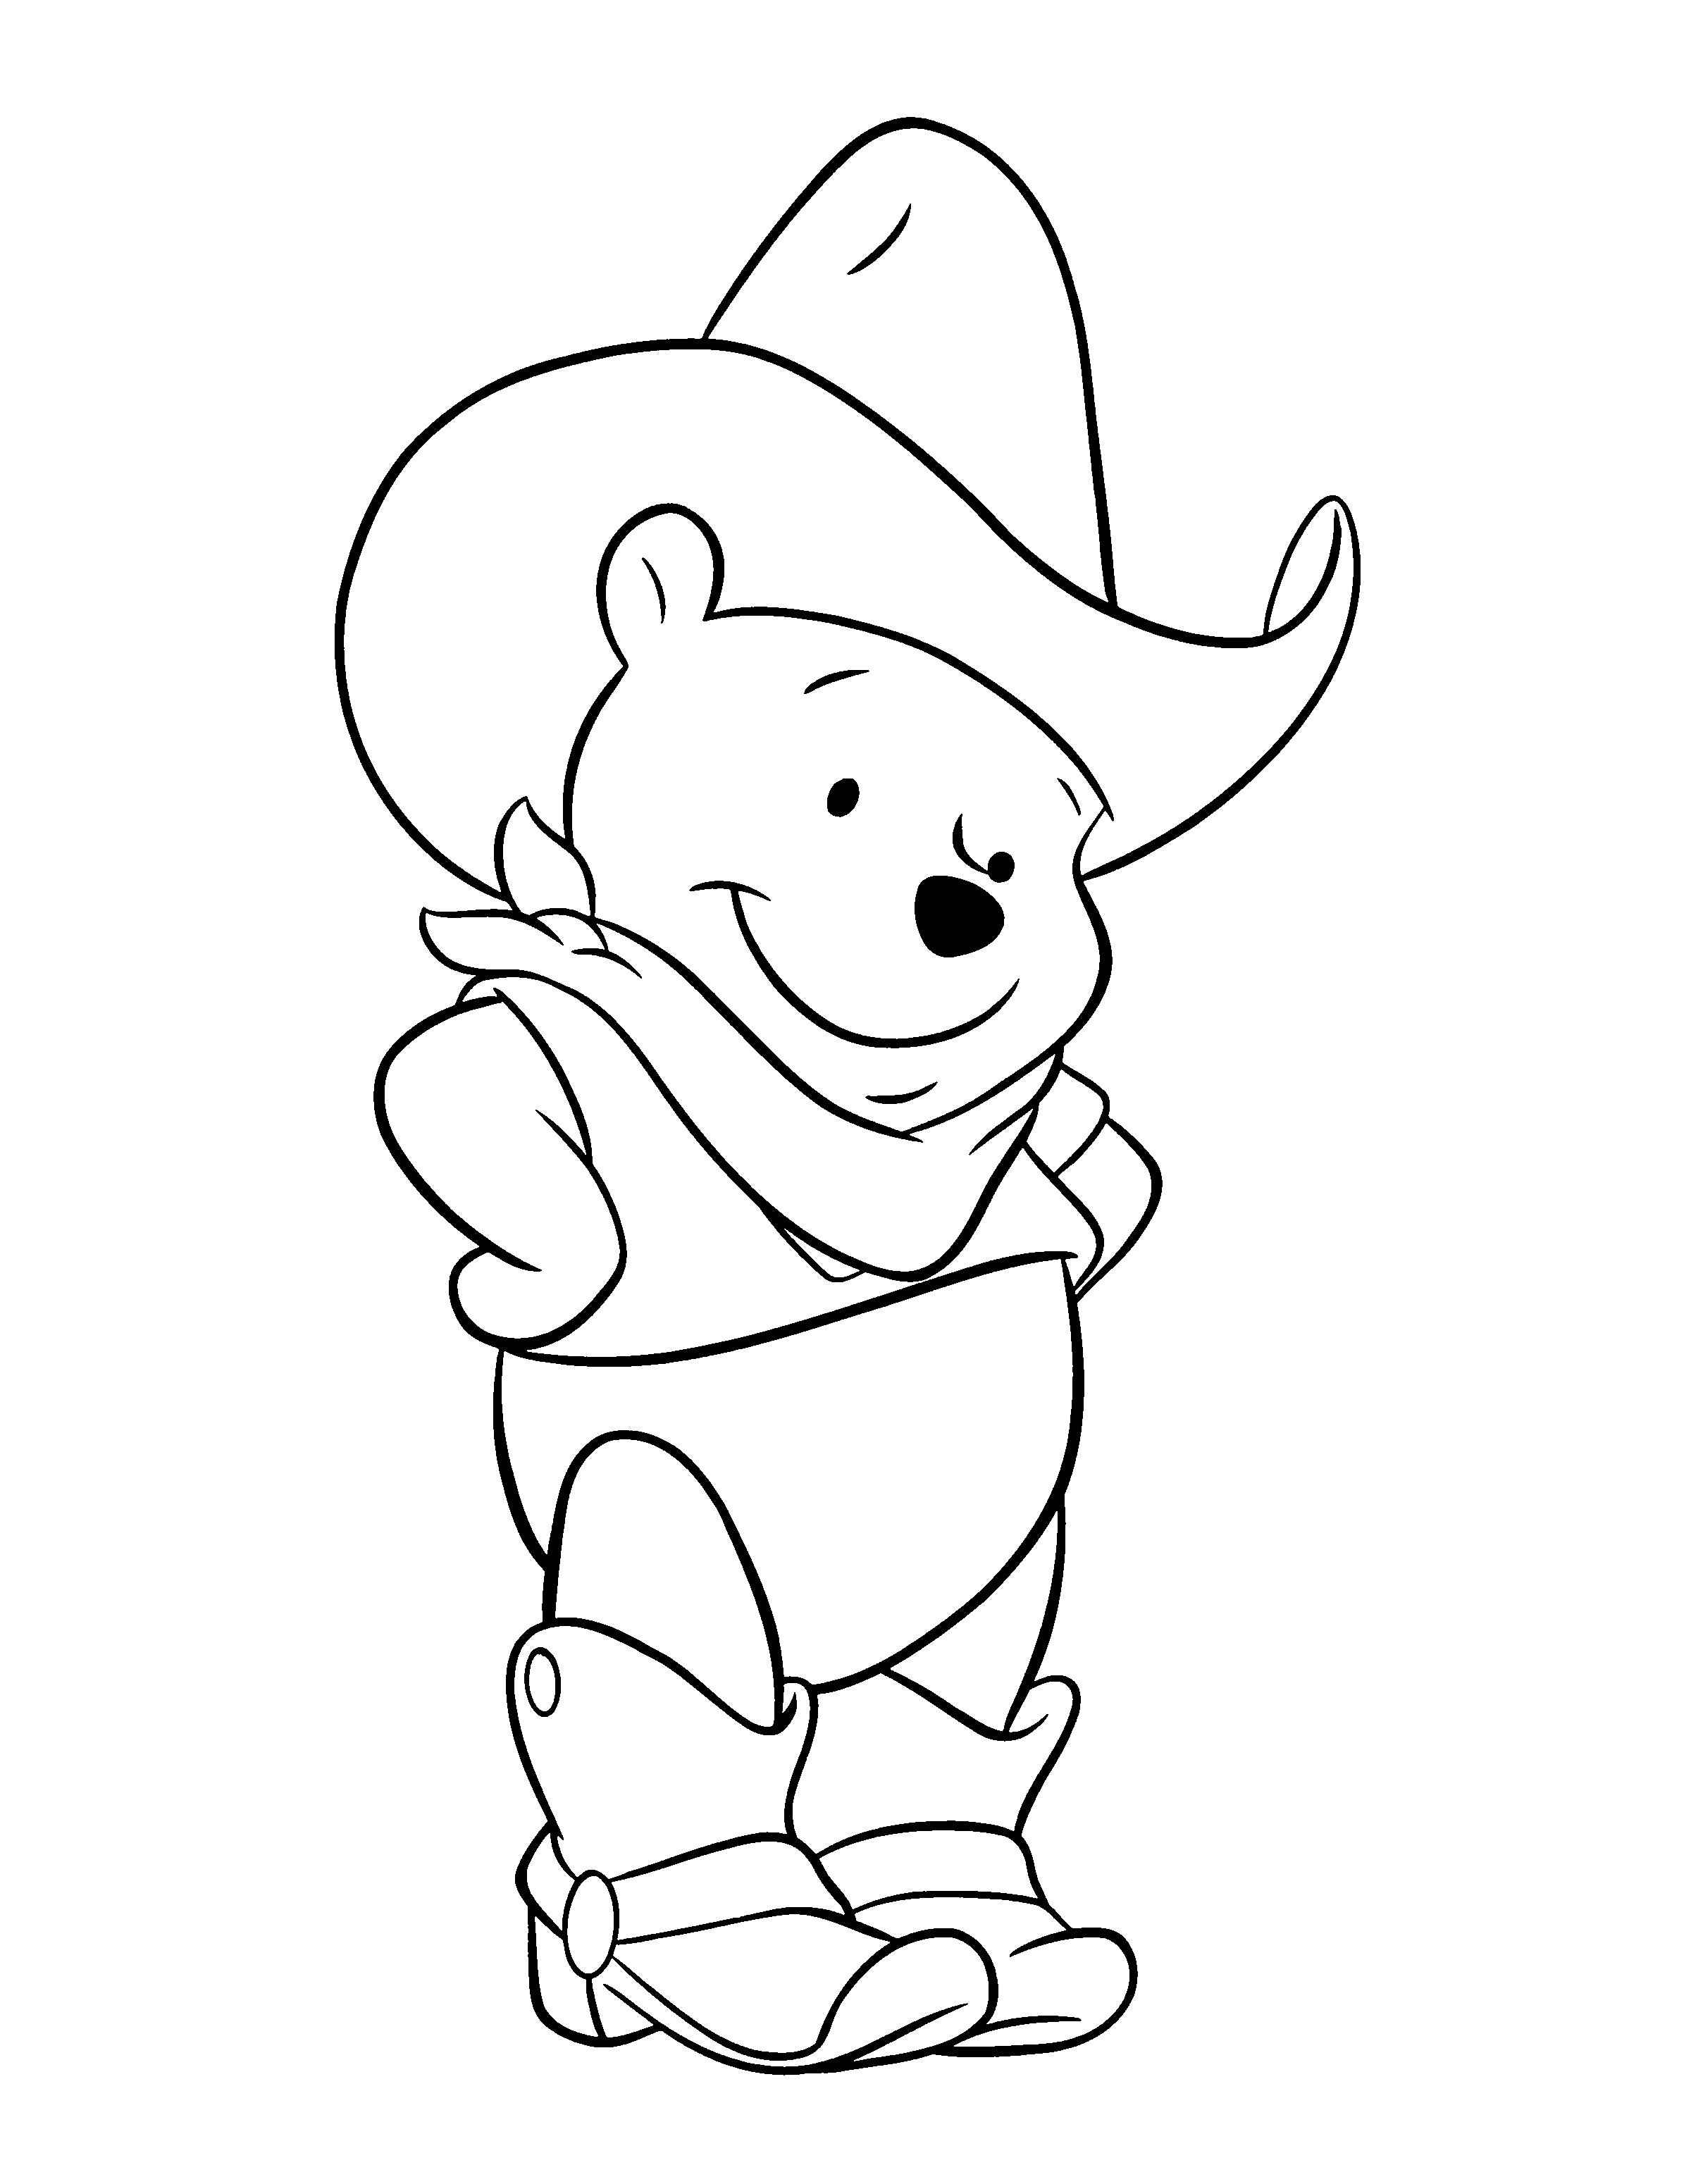 coloring-page-winnie-the-pooh-coloring-pages-93